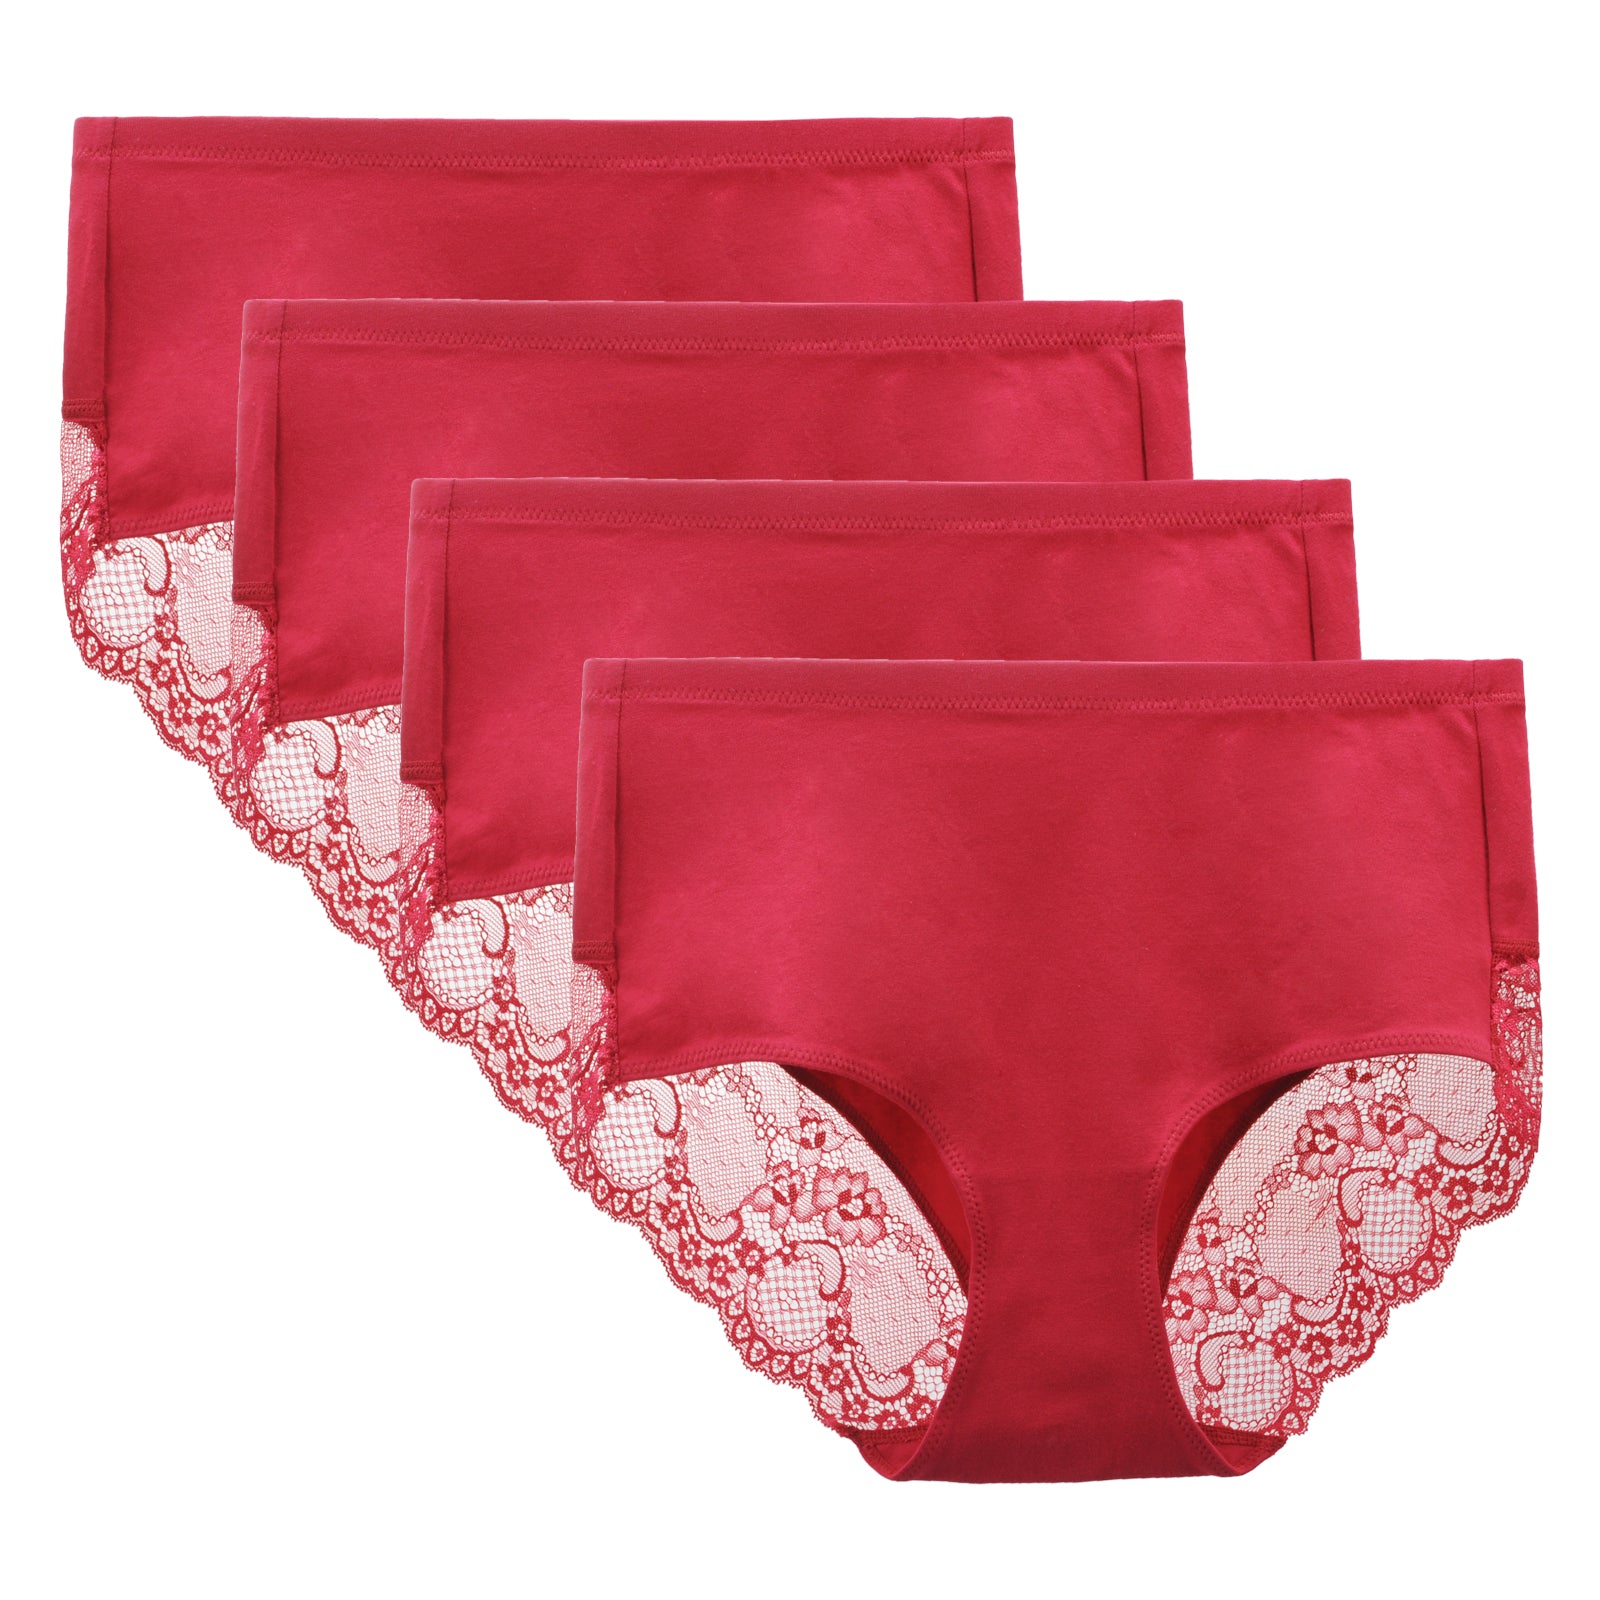 SAYFUT Women's High Waist Lace Print Cotton Solid Underwear Full Coverage  Brief Panty 4 Pack